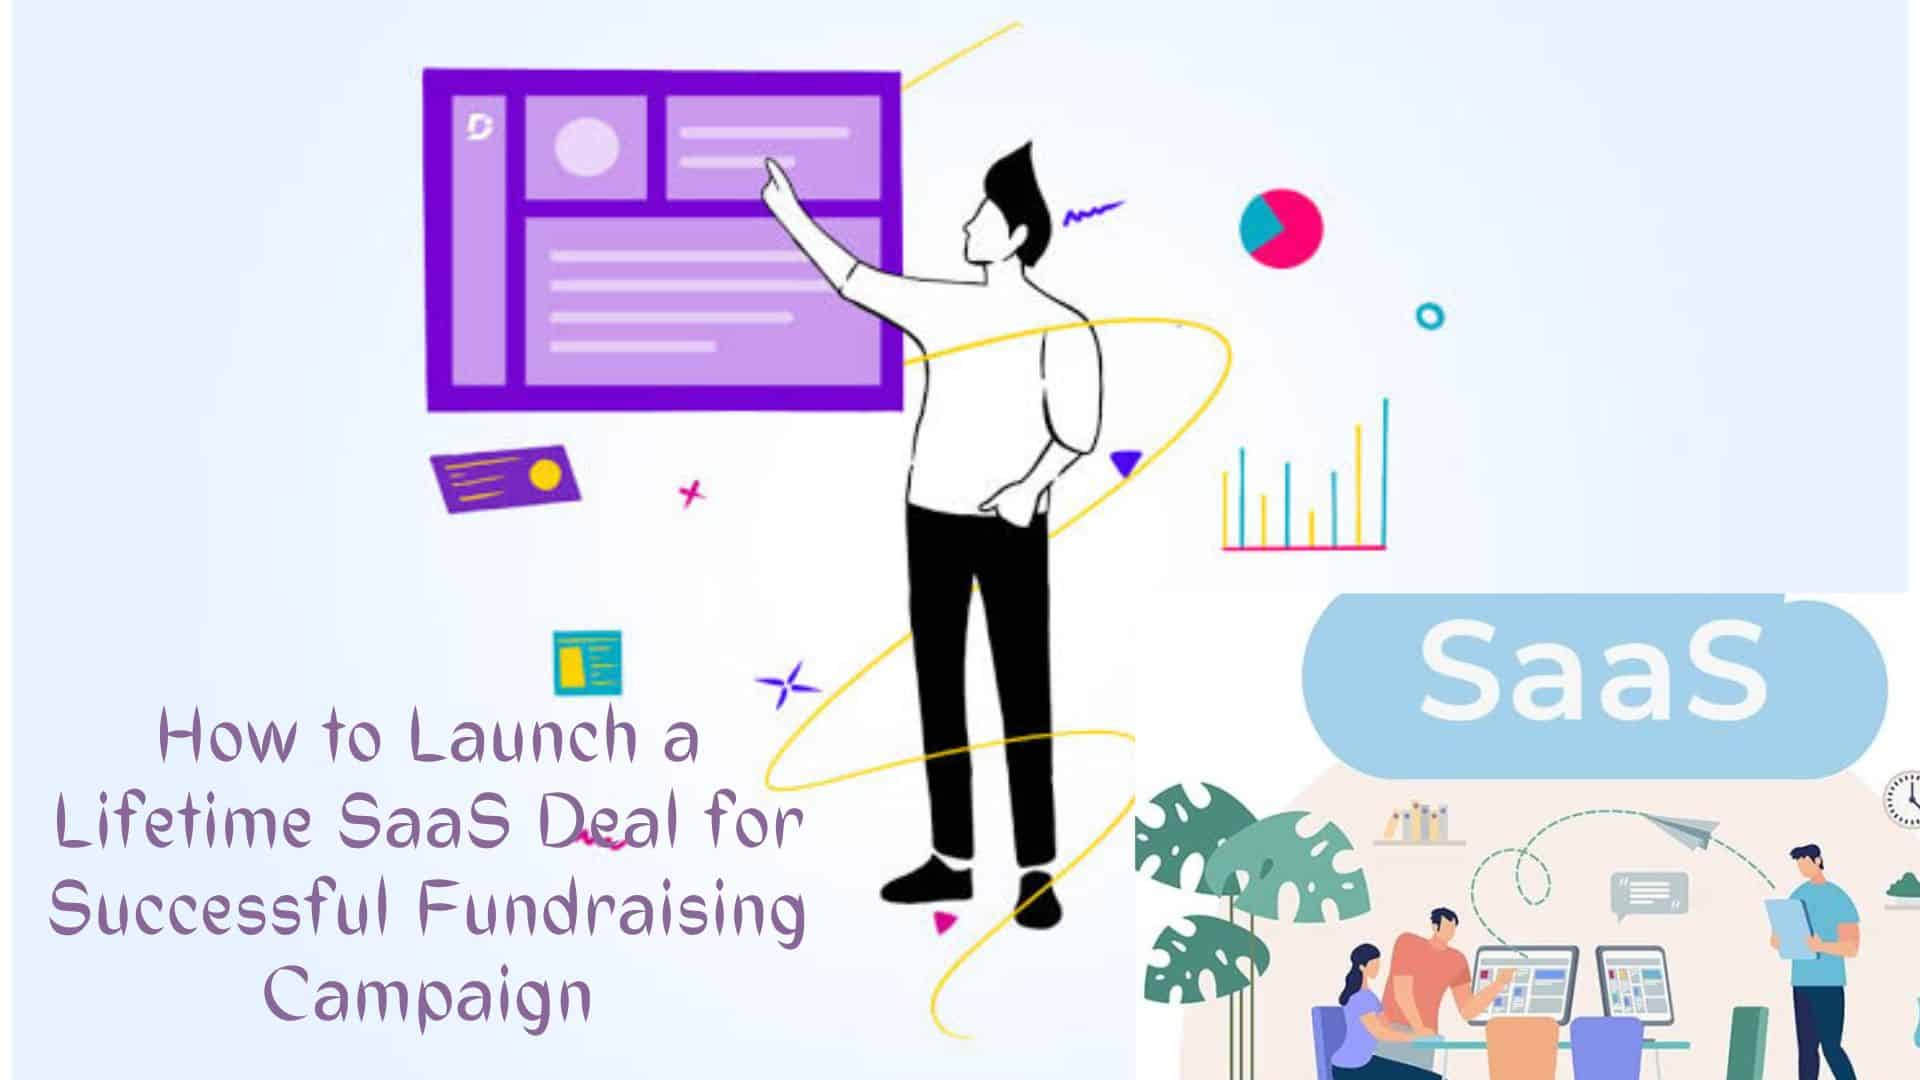 How to Launch a Lifetime SaaS Deal for a Successful Fundraising Campaign